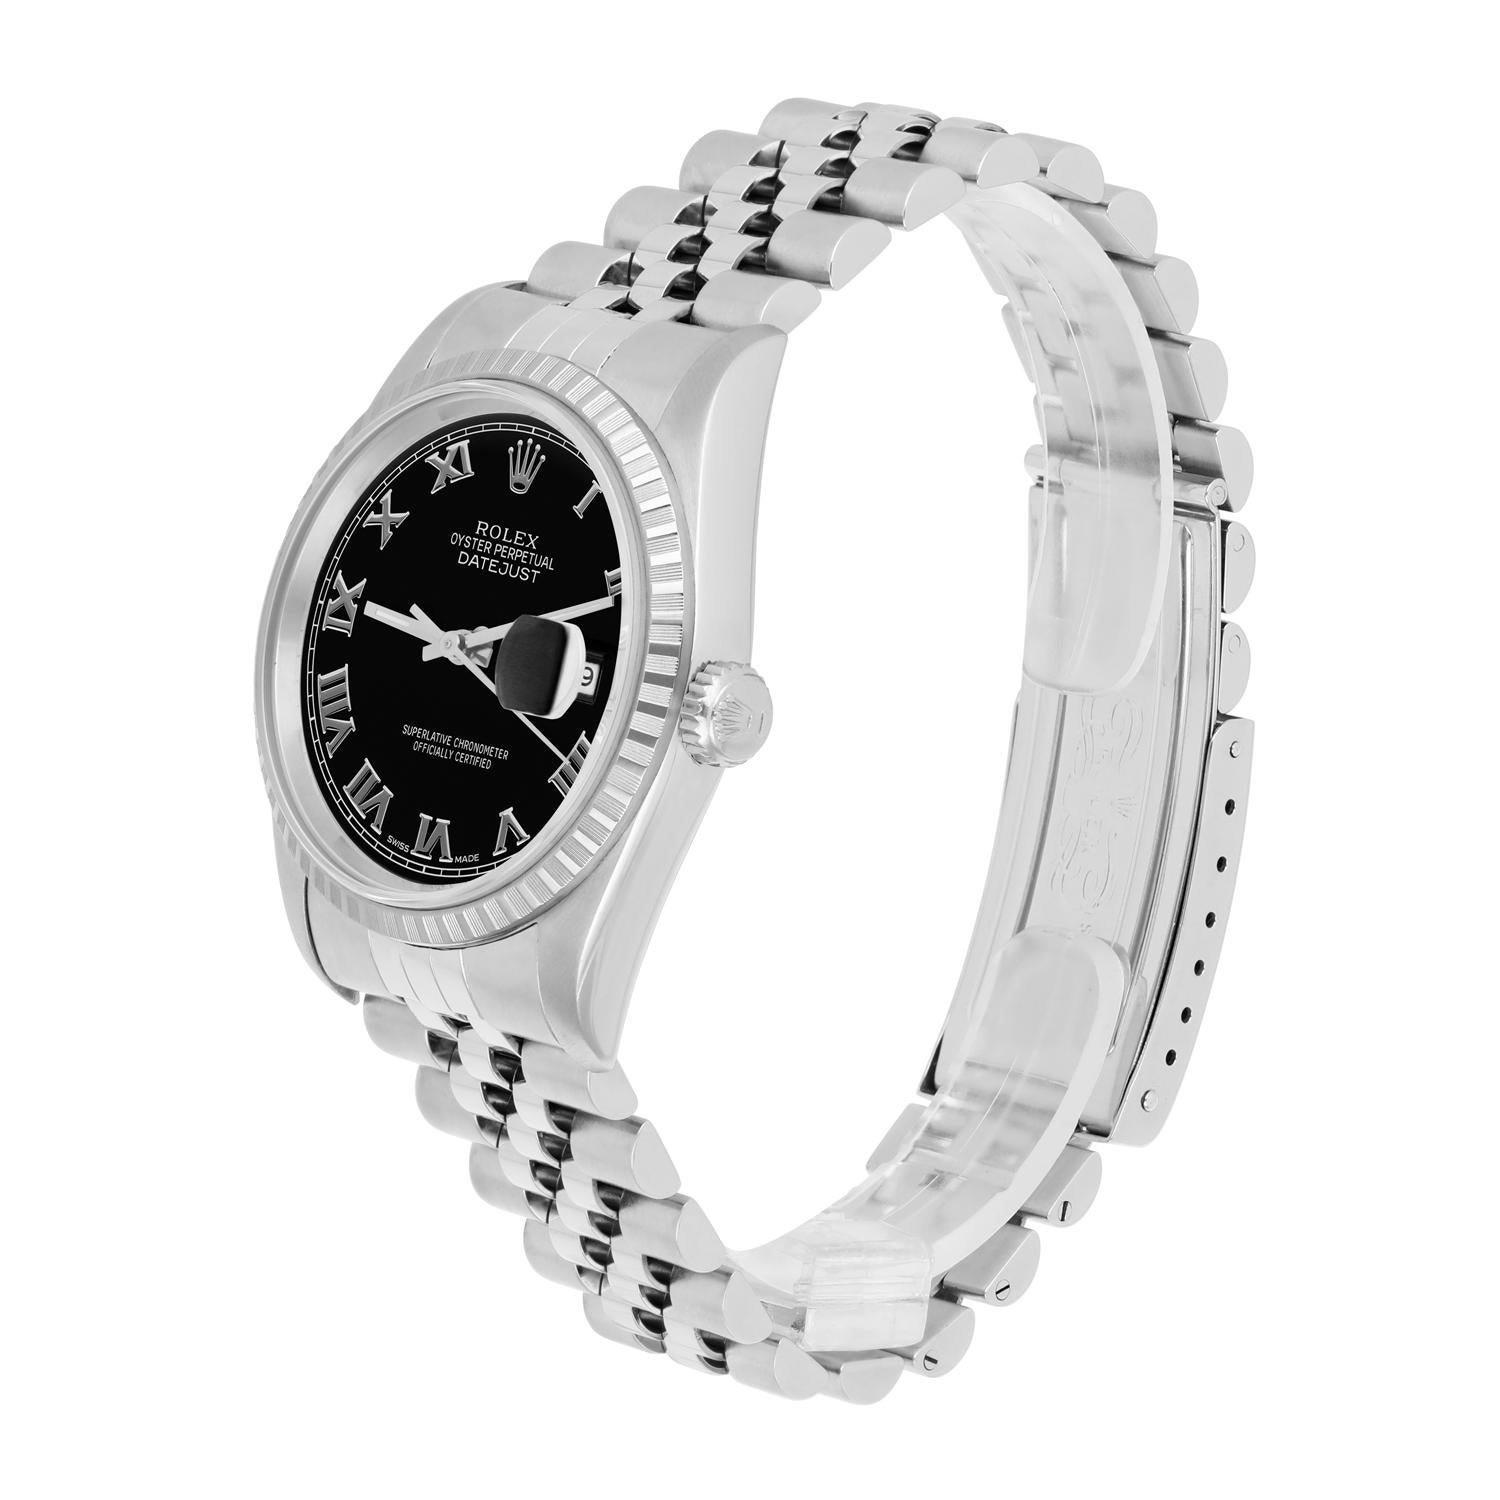 Women's or Men's Rolex Datejust 36mm Stainless Steel Watch Black Roman Dial 16220 Circa 2000 For Sale